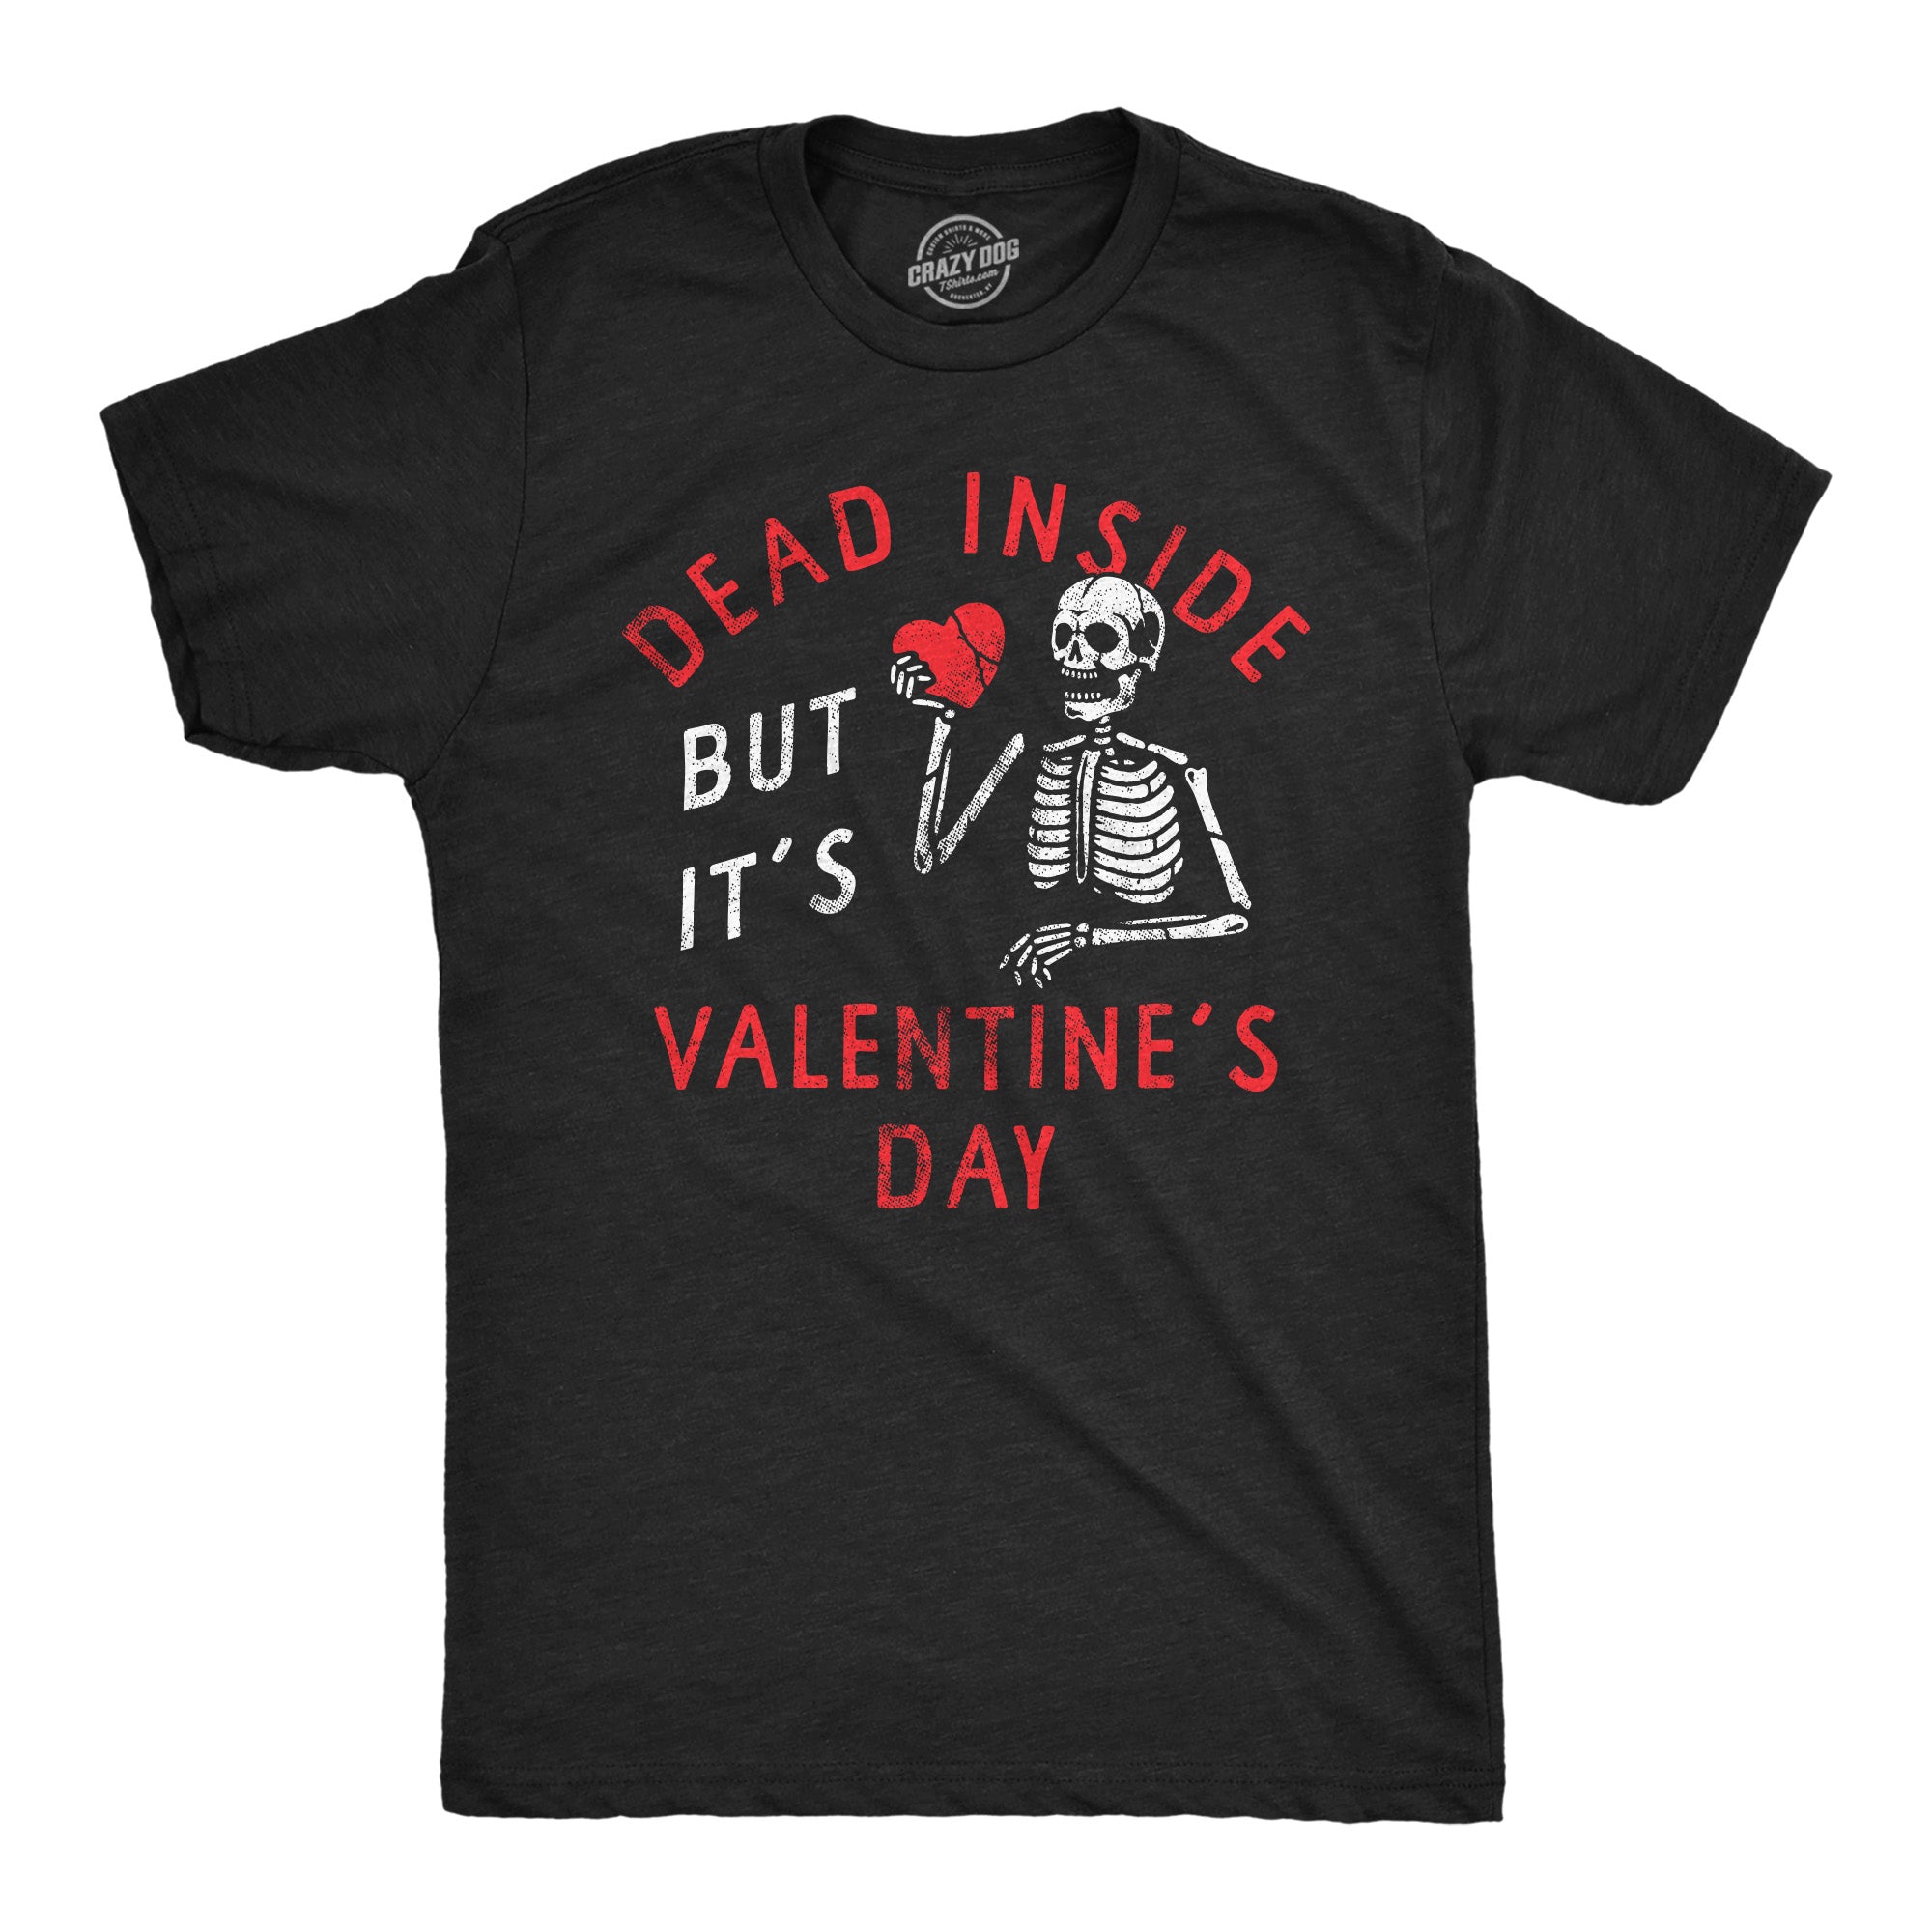 Funny Heather Black - Dead Inside Valentines Day Dead Inside But Its Valentines Day Mens T Shirt Nerdy Valentine's Day Sarcastic Tee